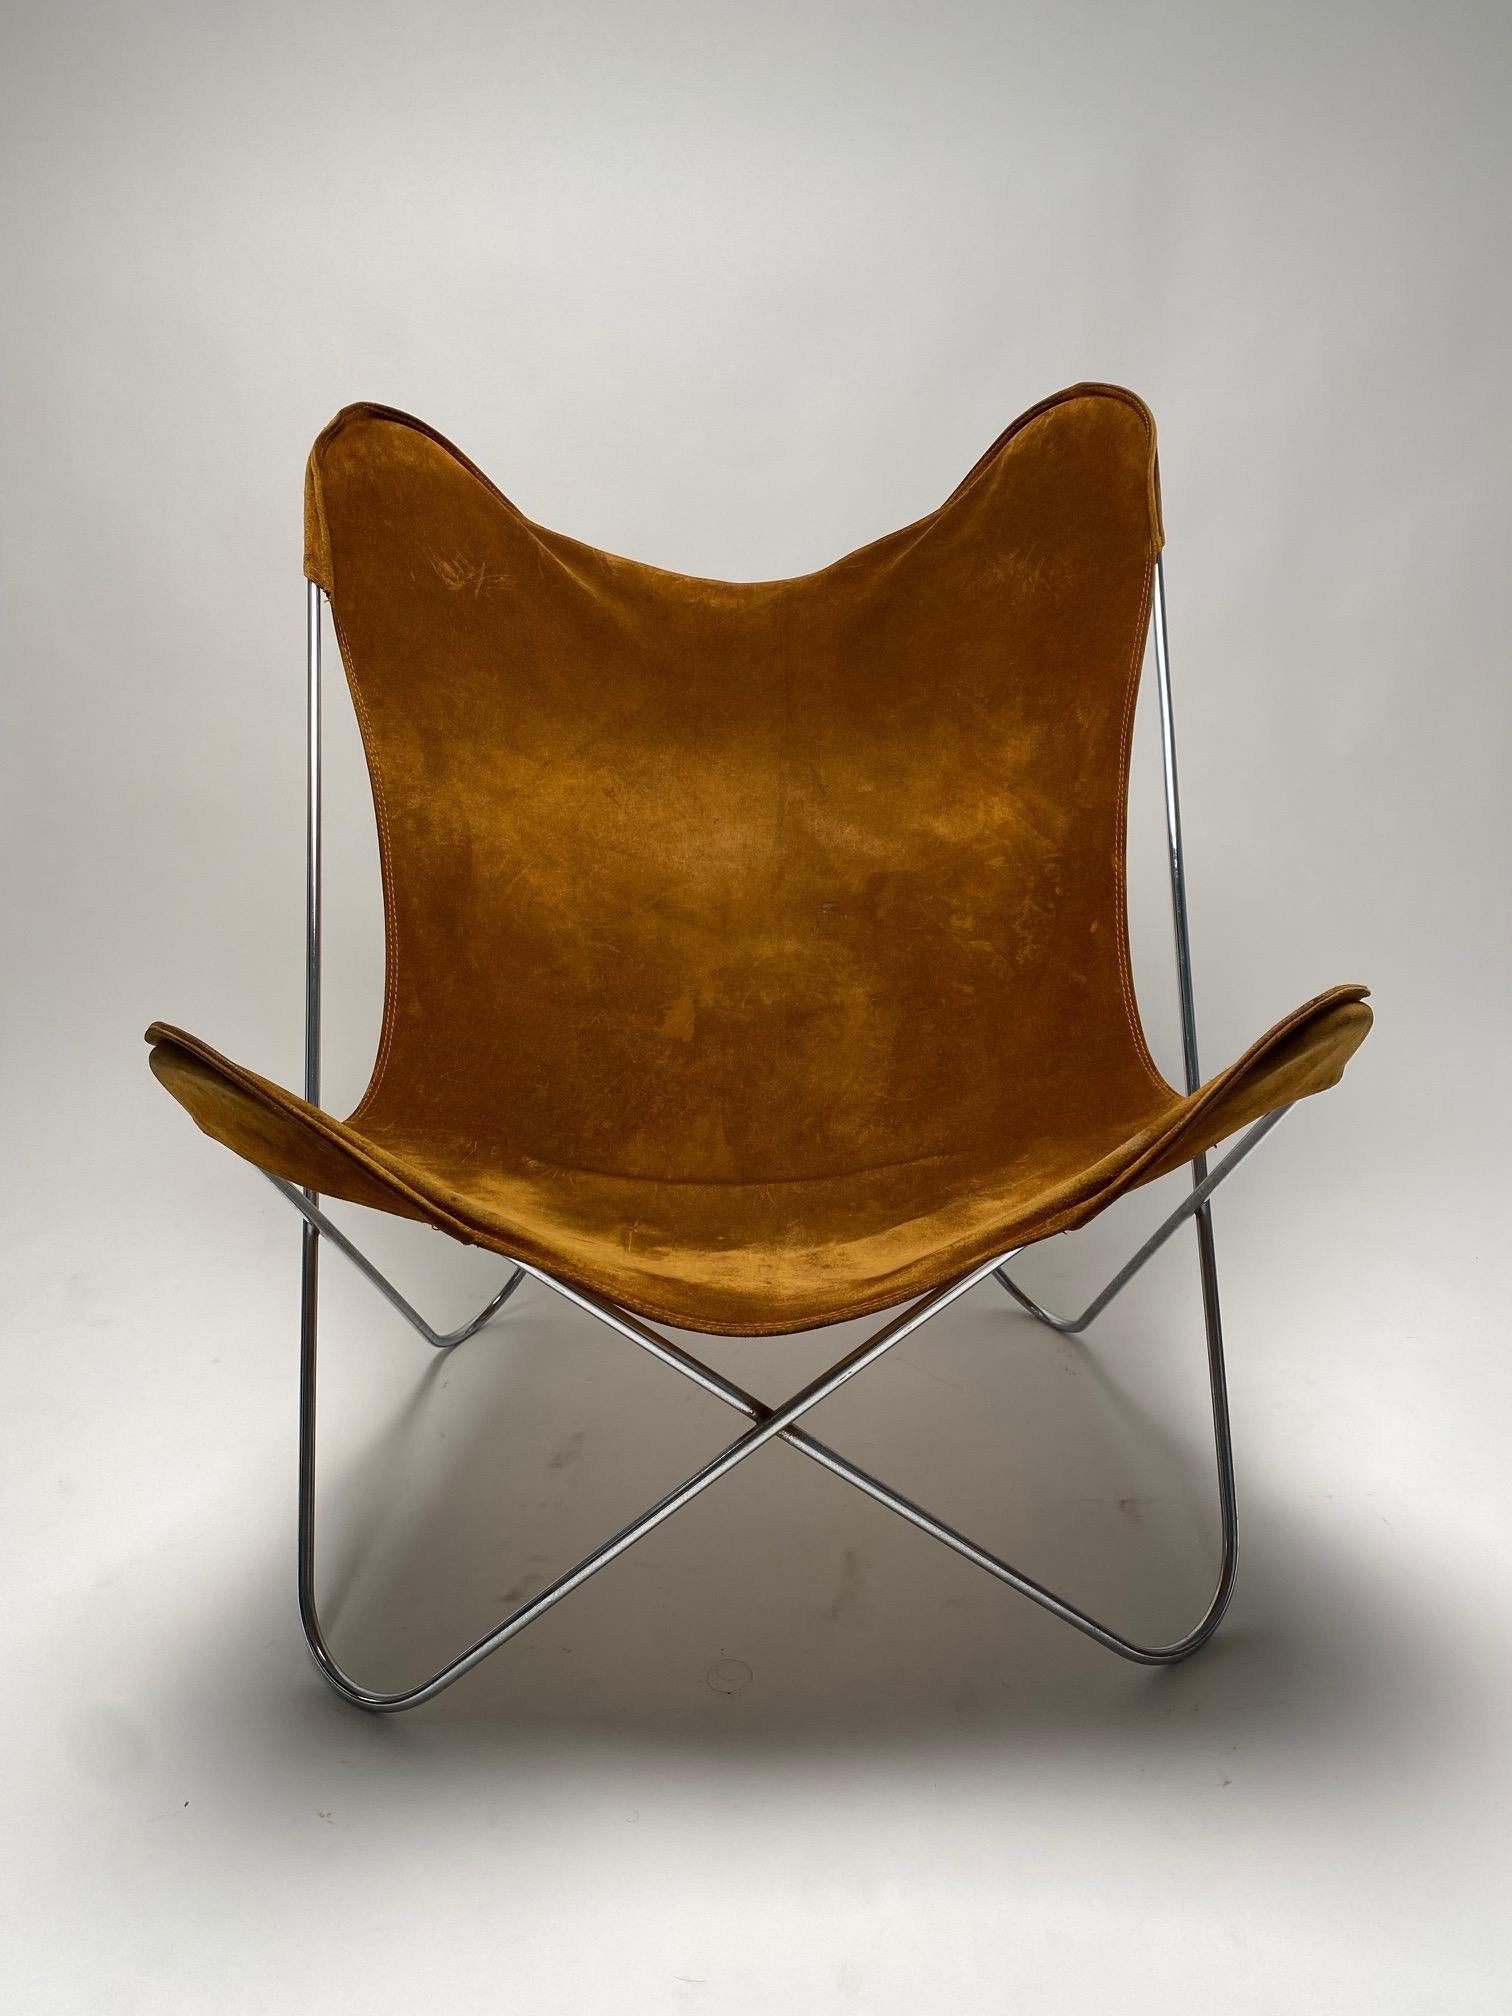 This Tripolina armchair is produced by Dino Gavina in 1950, it is a supporting structure in chromed steel and support canvas in suede. The designer is anonymous but as Gavina himself writes in the description of the object 